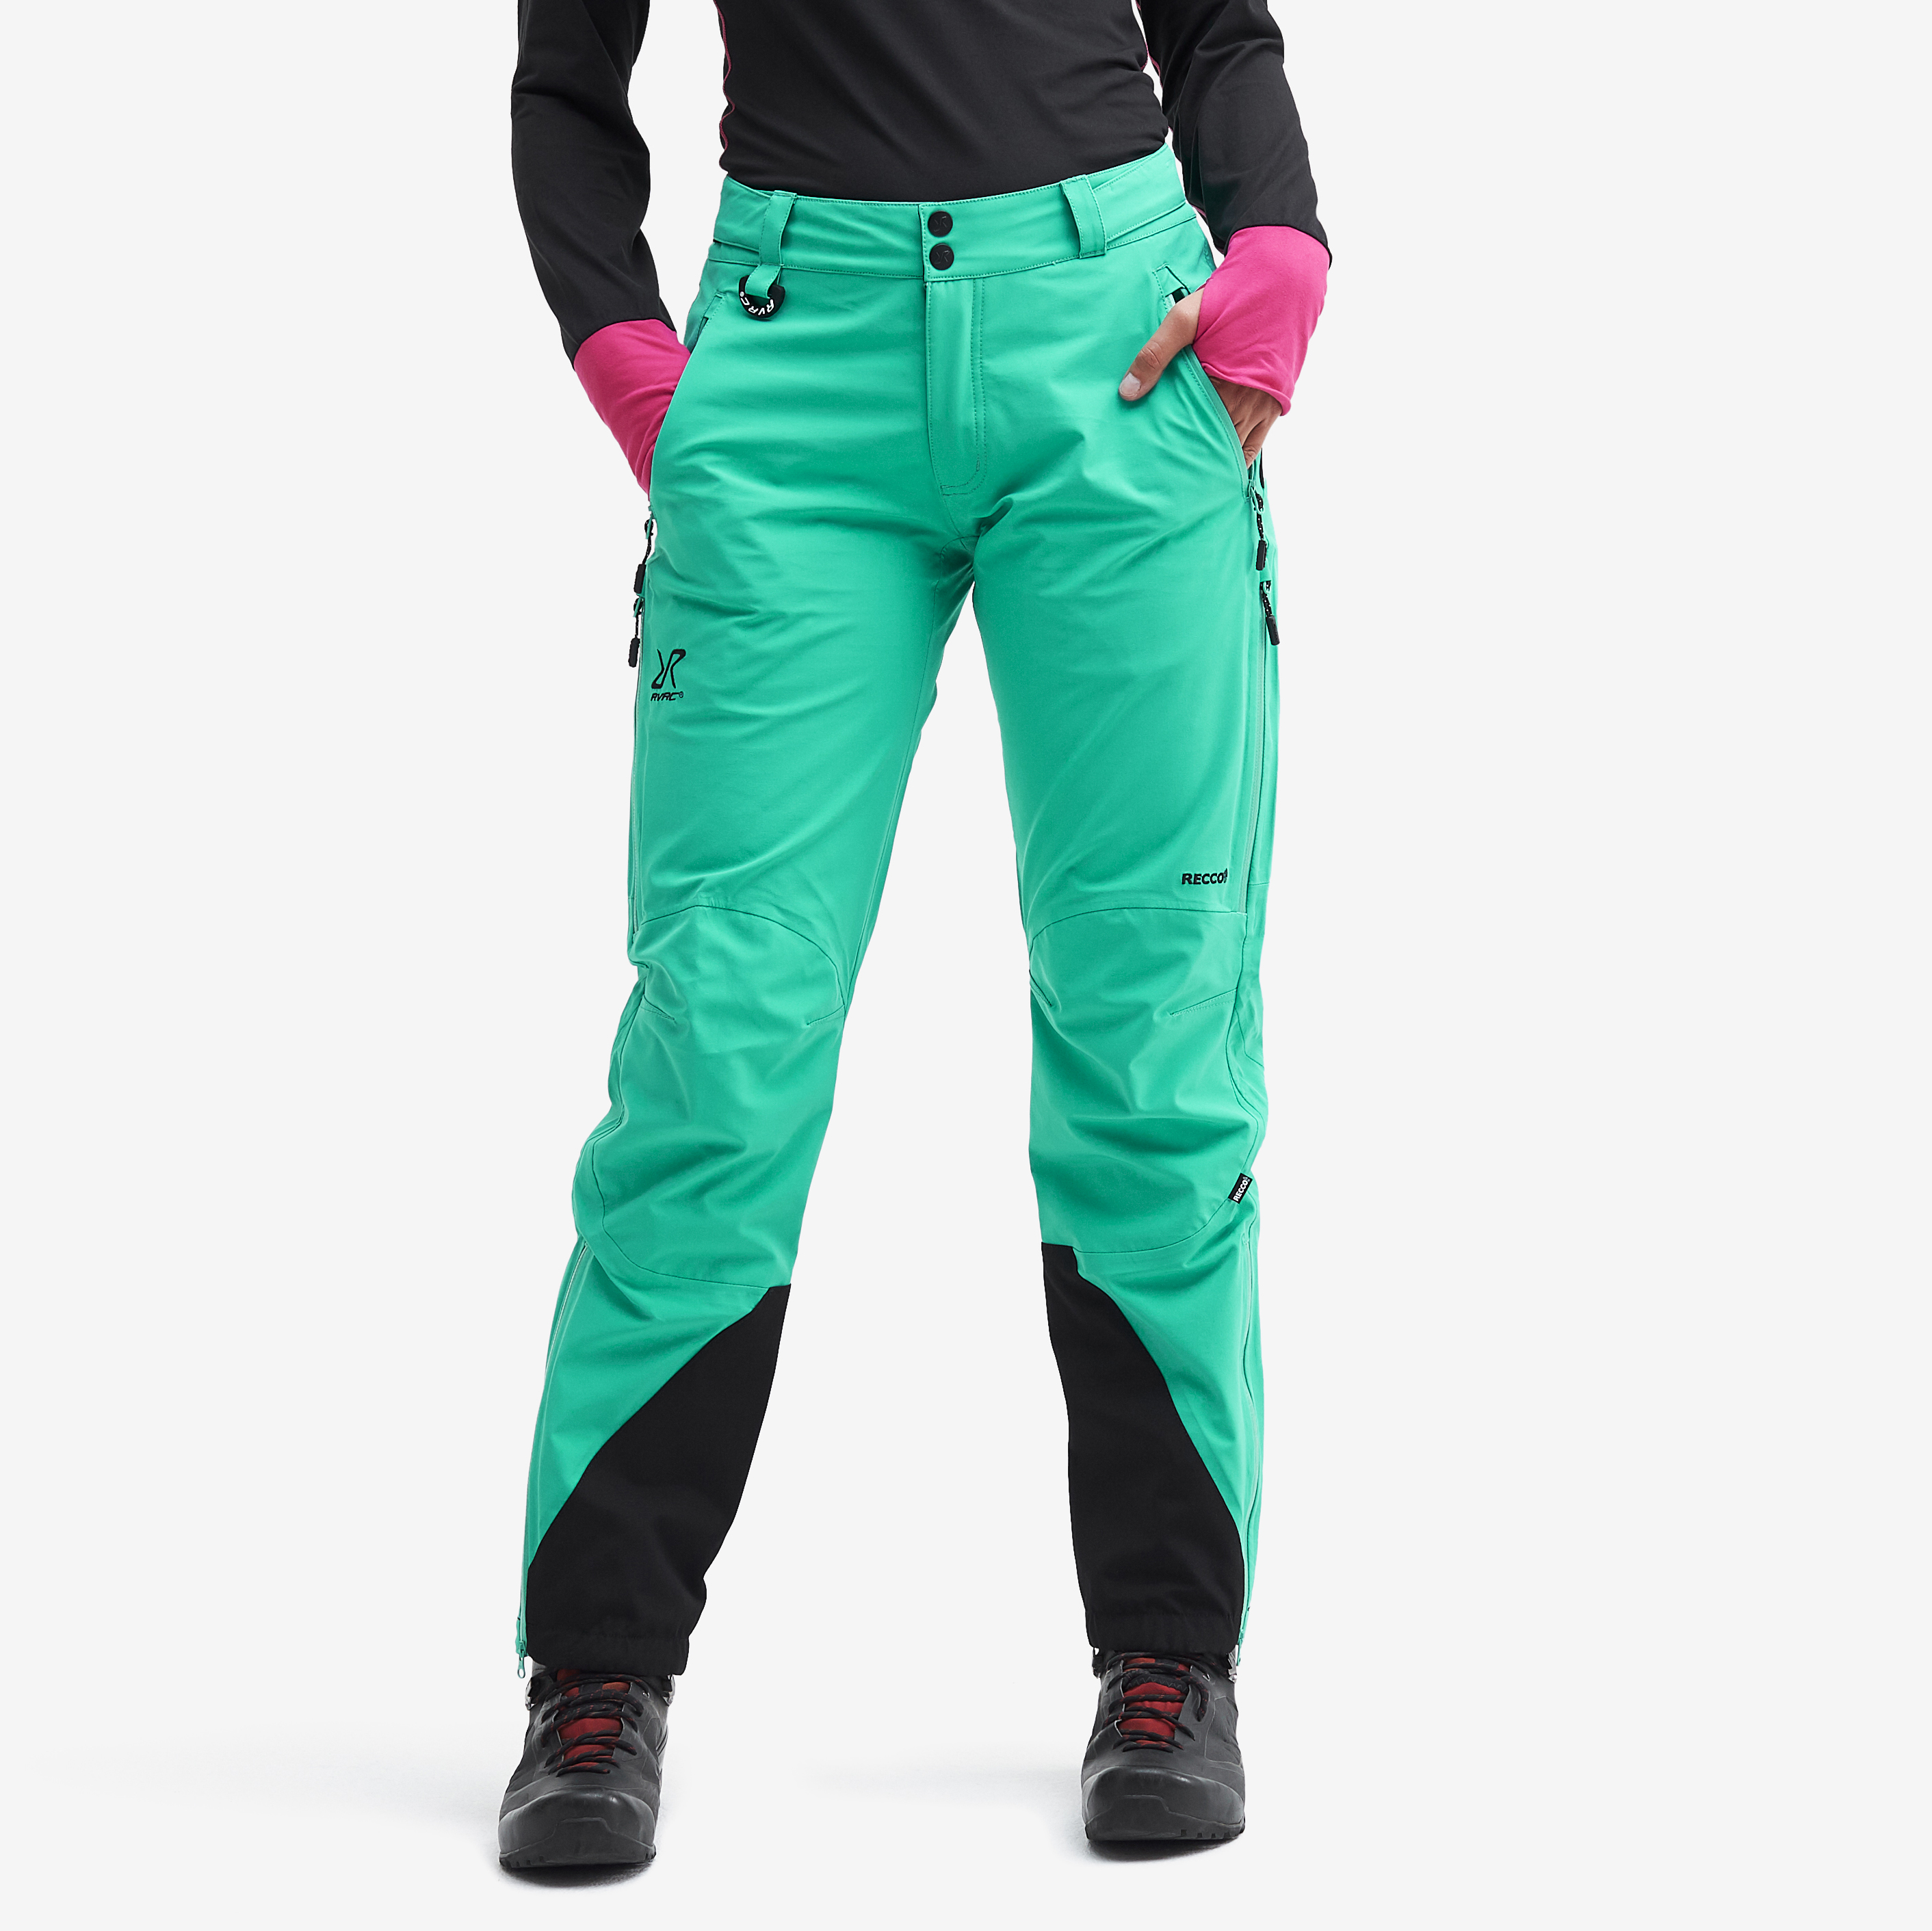 Cyclone Rescue Pants Spectra Green